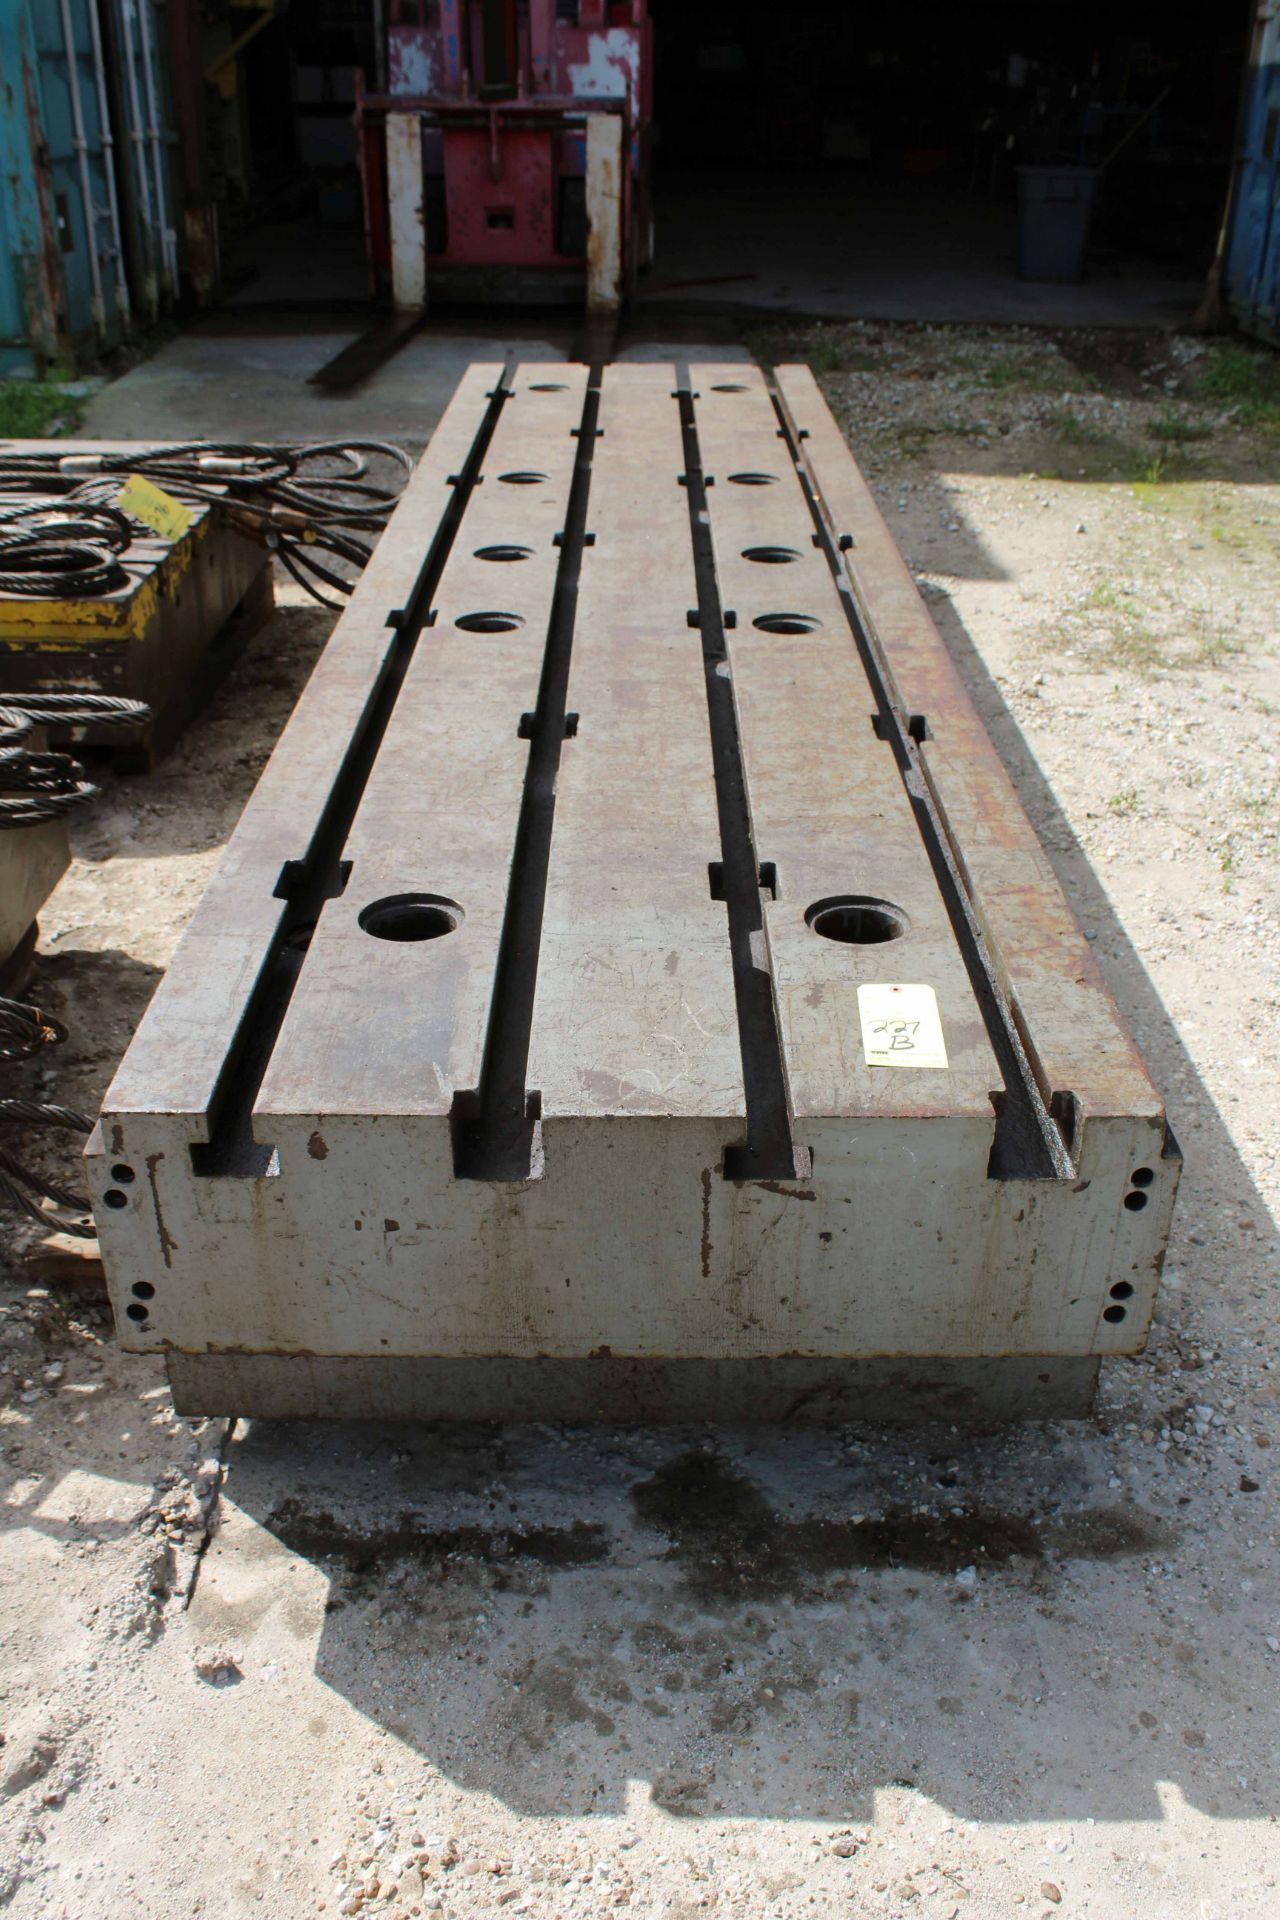 T-SLOTTED SETUP FIXTURE, 13' x 41" x 20", approx. 15,000 lb. (Location 16 - this location will